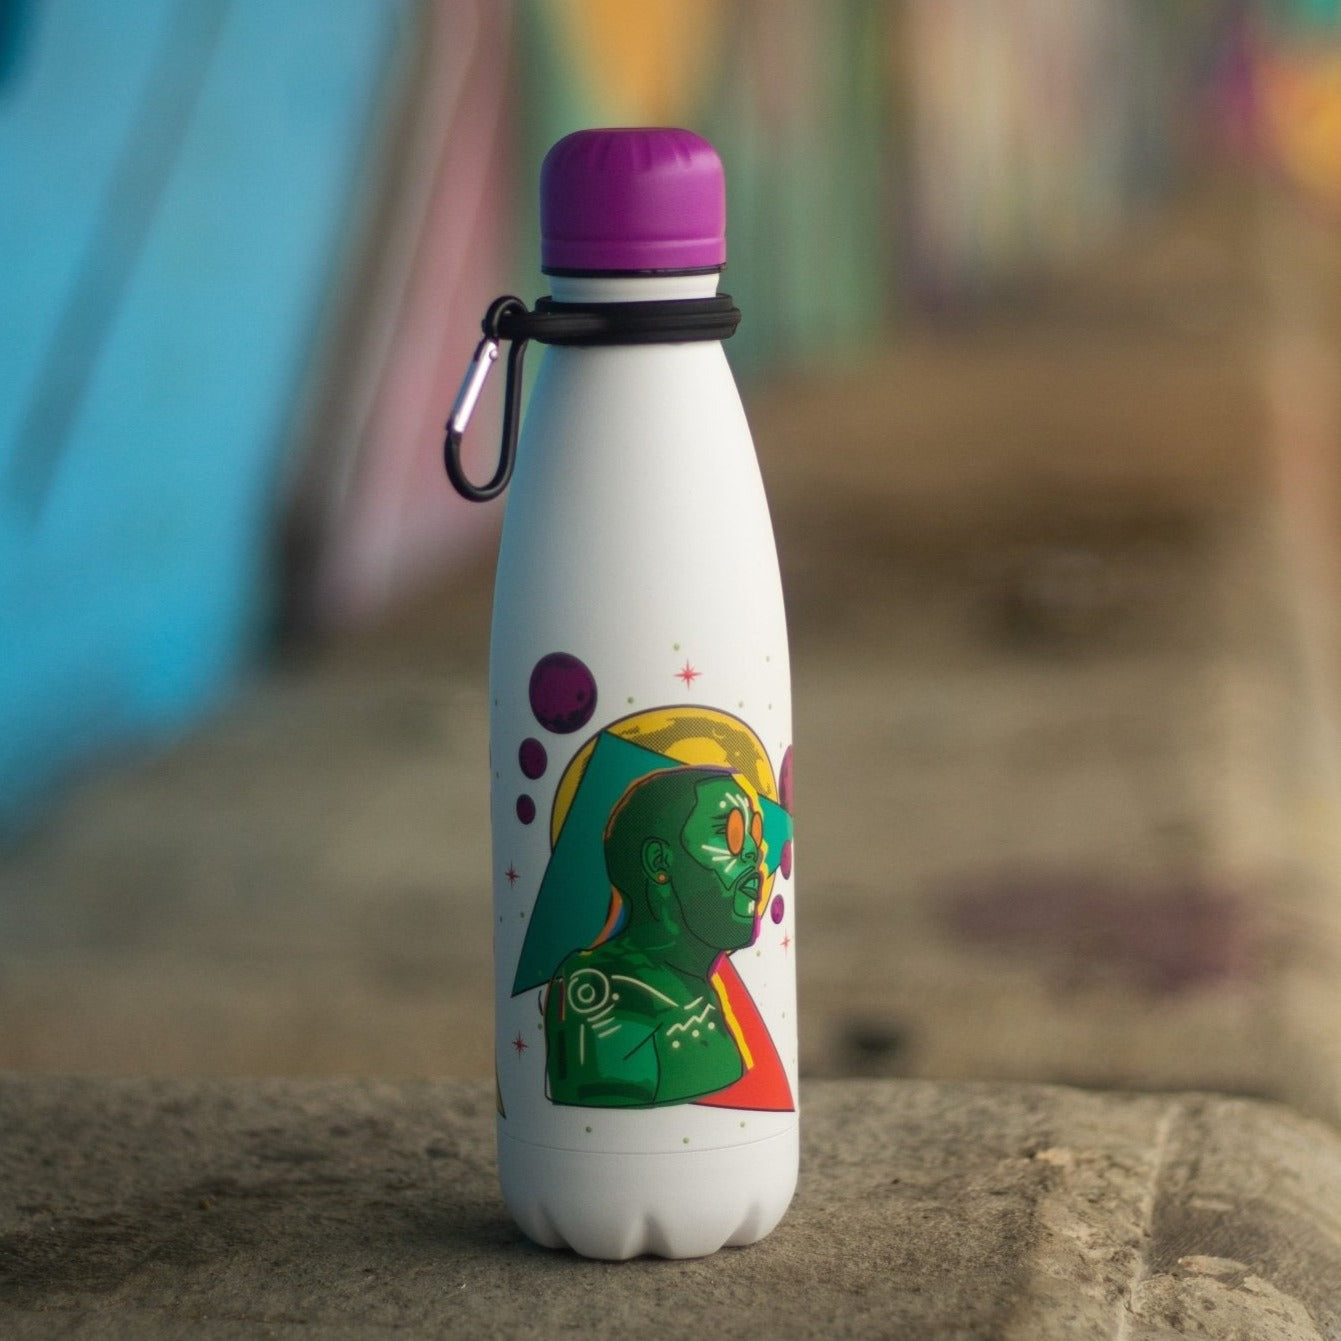 White stainless steel bottle with graffiti in the back ground